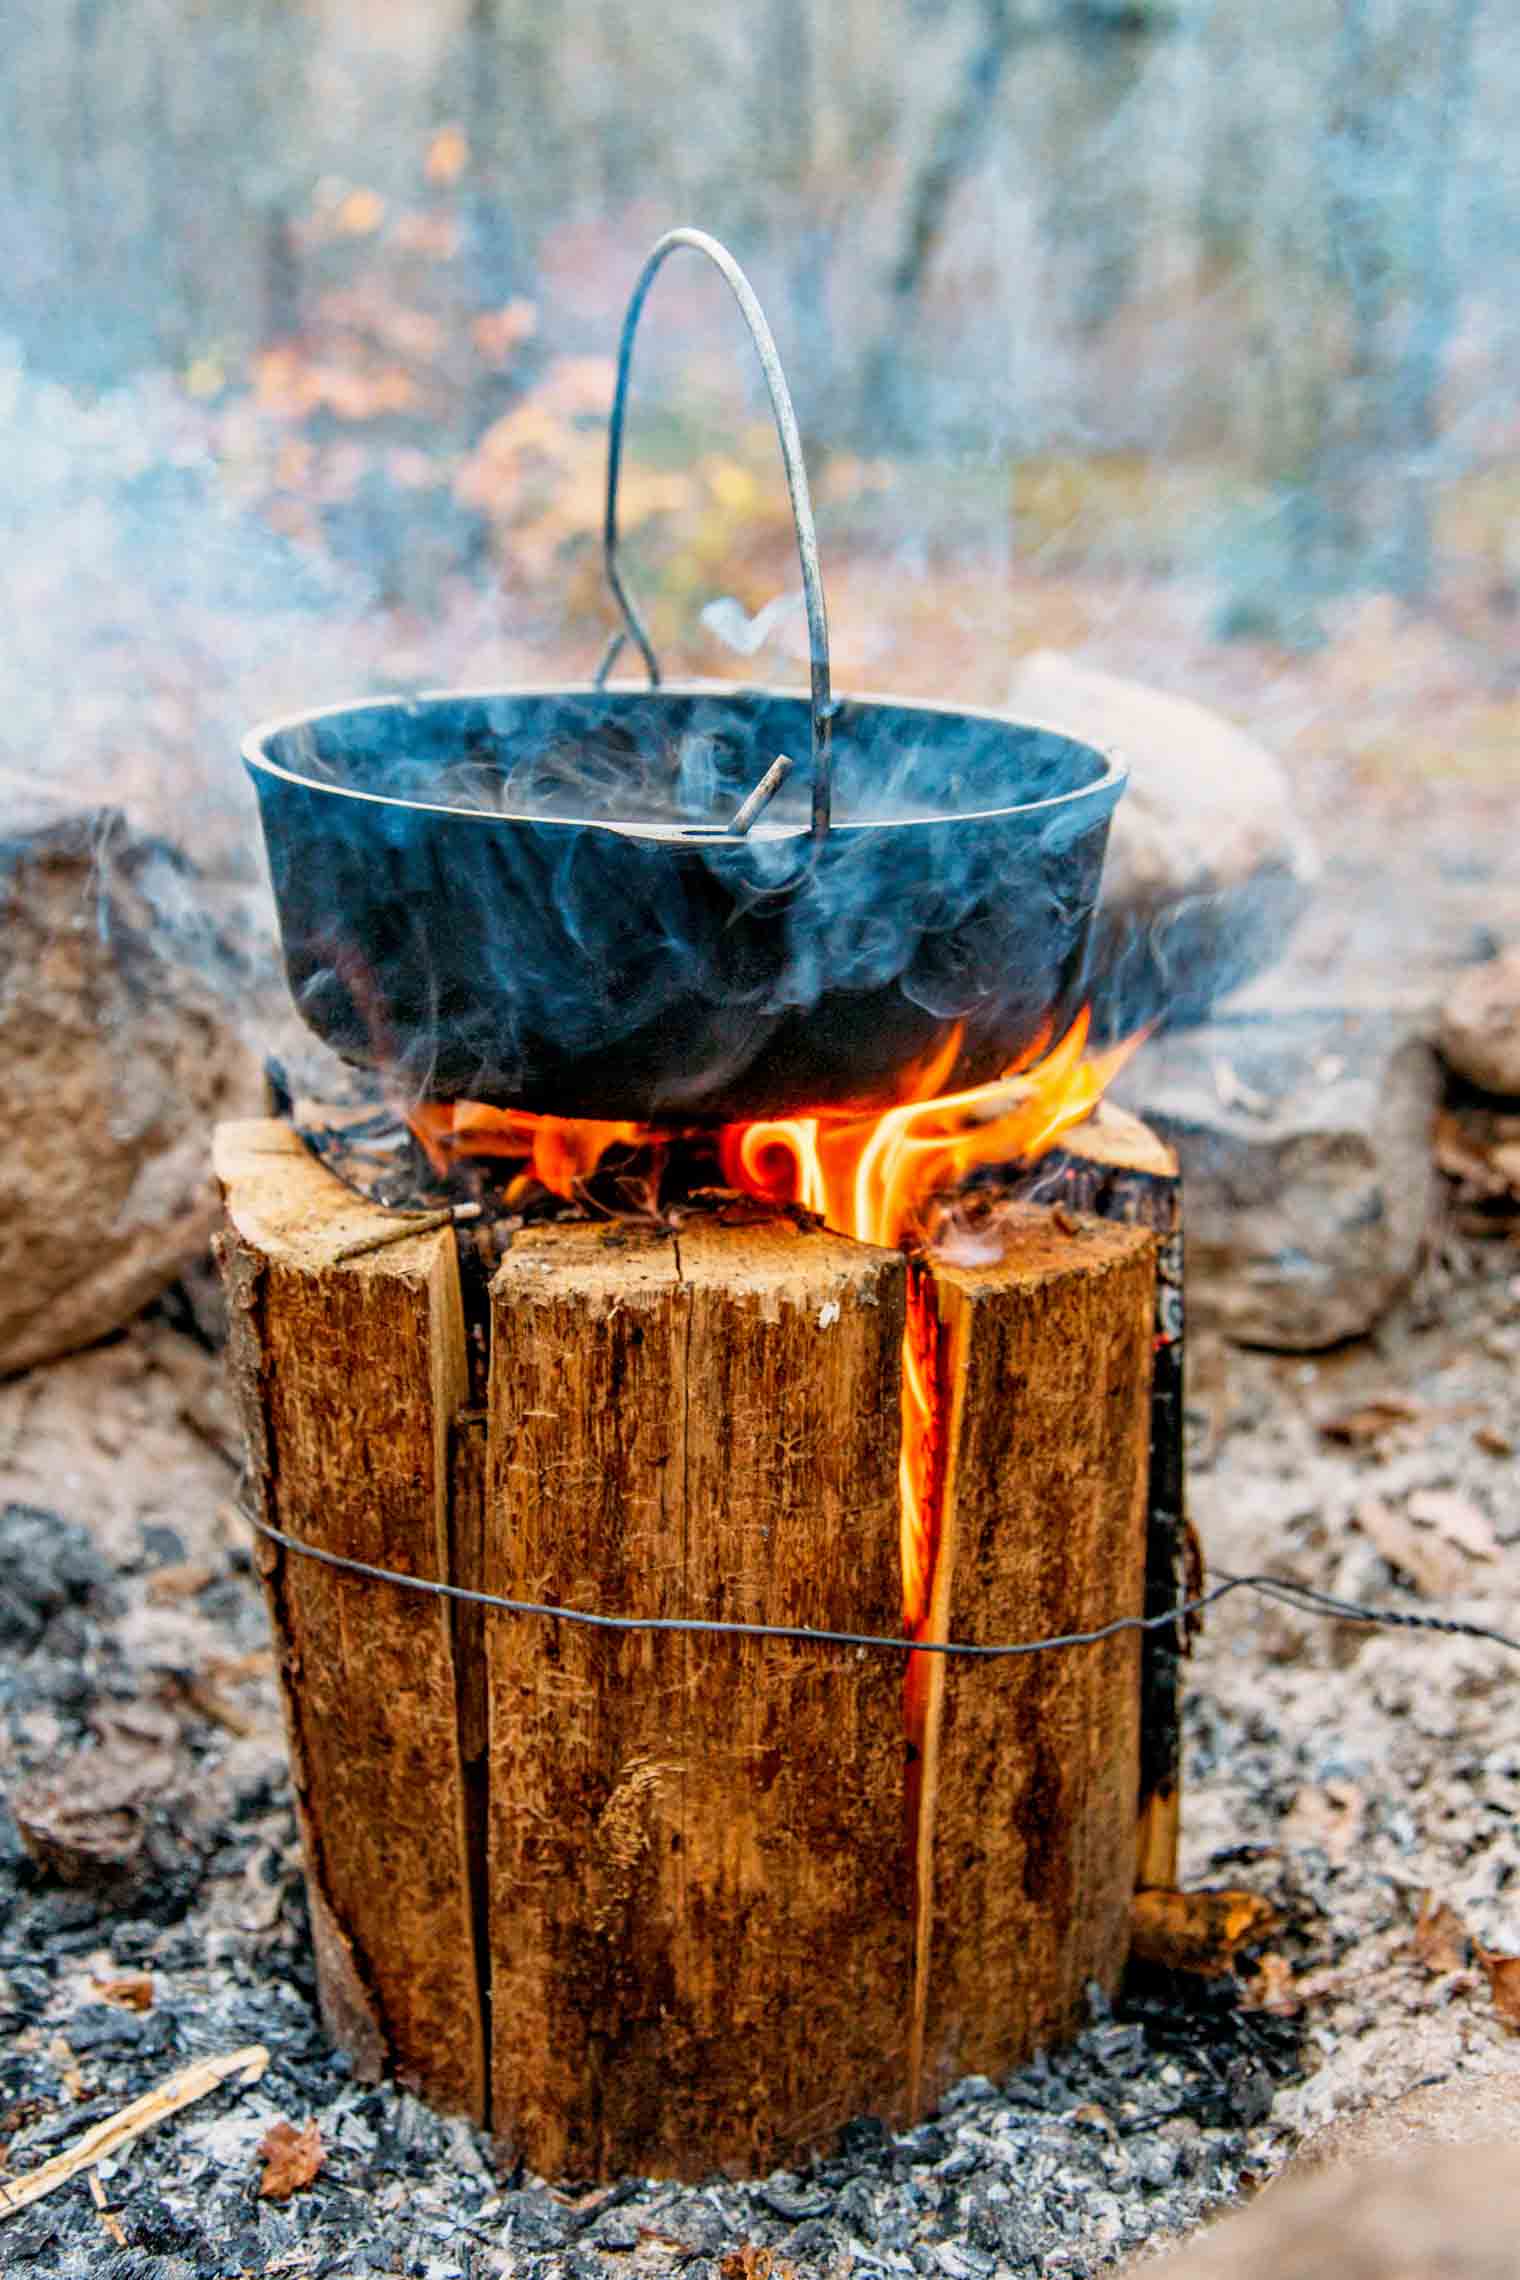 A Dutch oven sitting on the top of a Swedish firelog